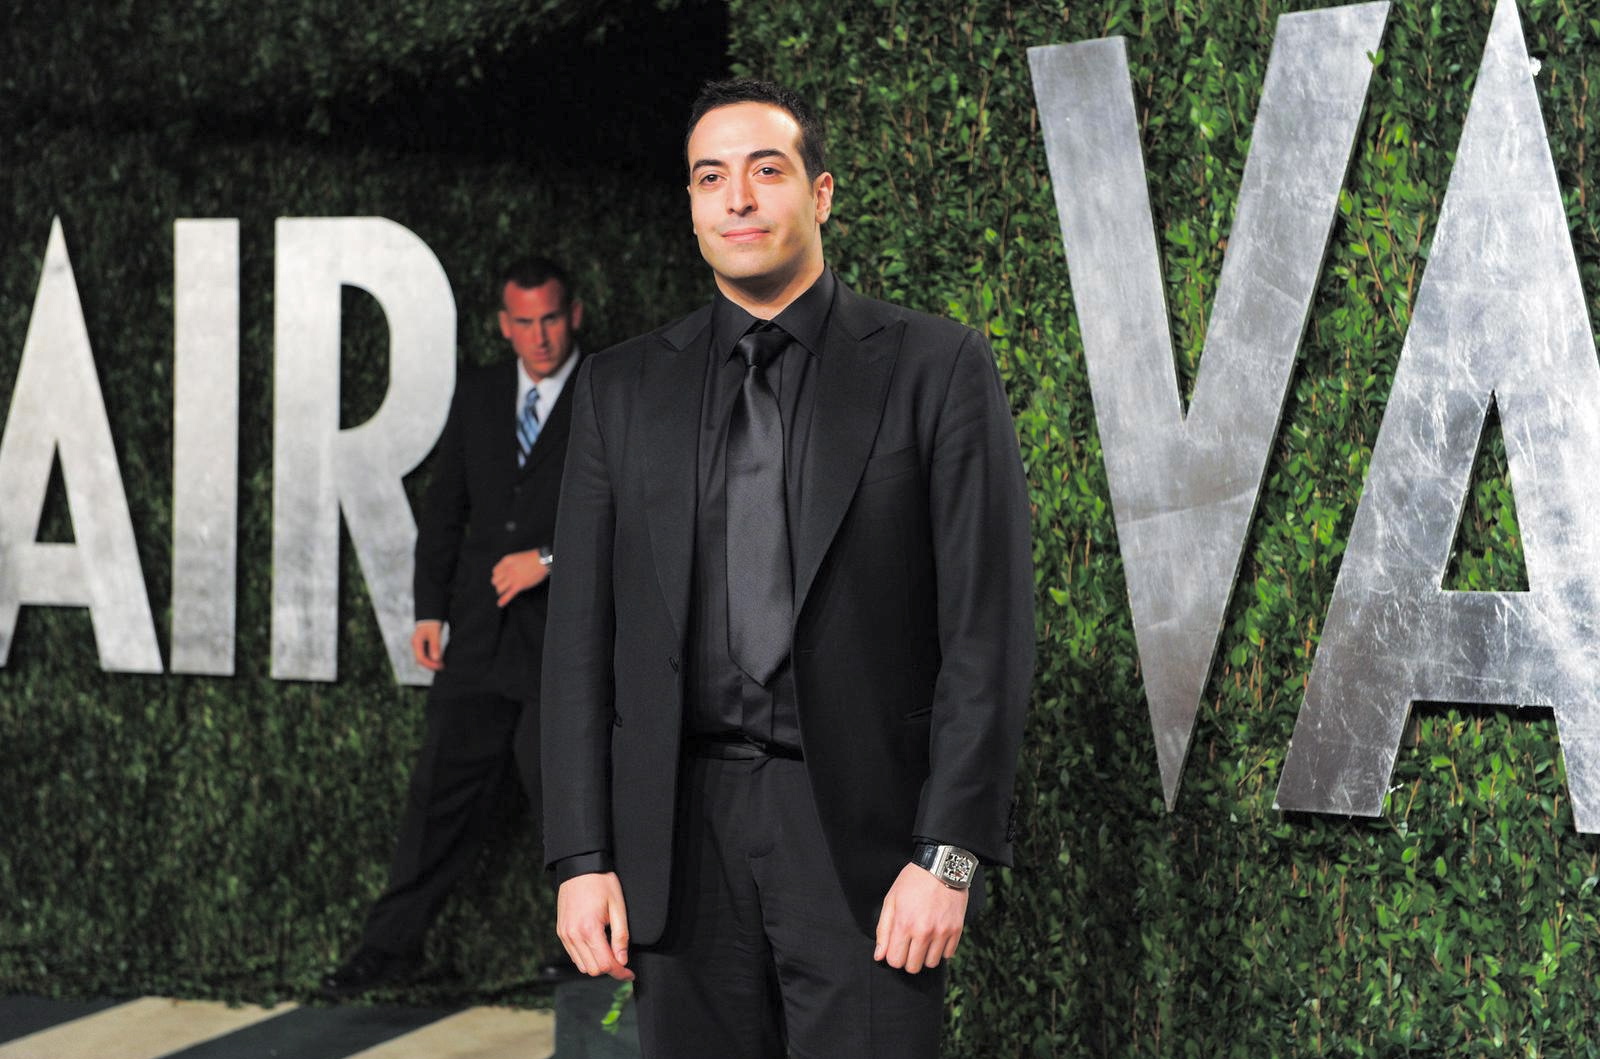 Mohammed Al Turki at the VANITY FAIR OSCAR PARTY - Red Carpet Arrivals. Sunset Tower, Hollywood, Los Angeles.